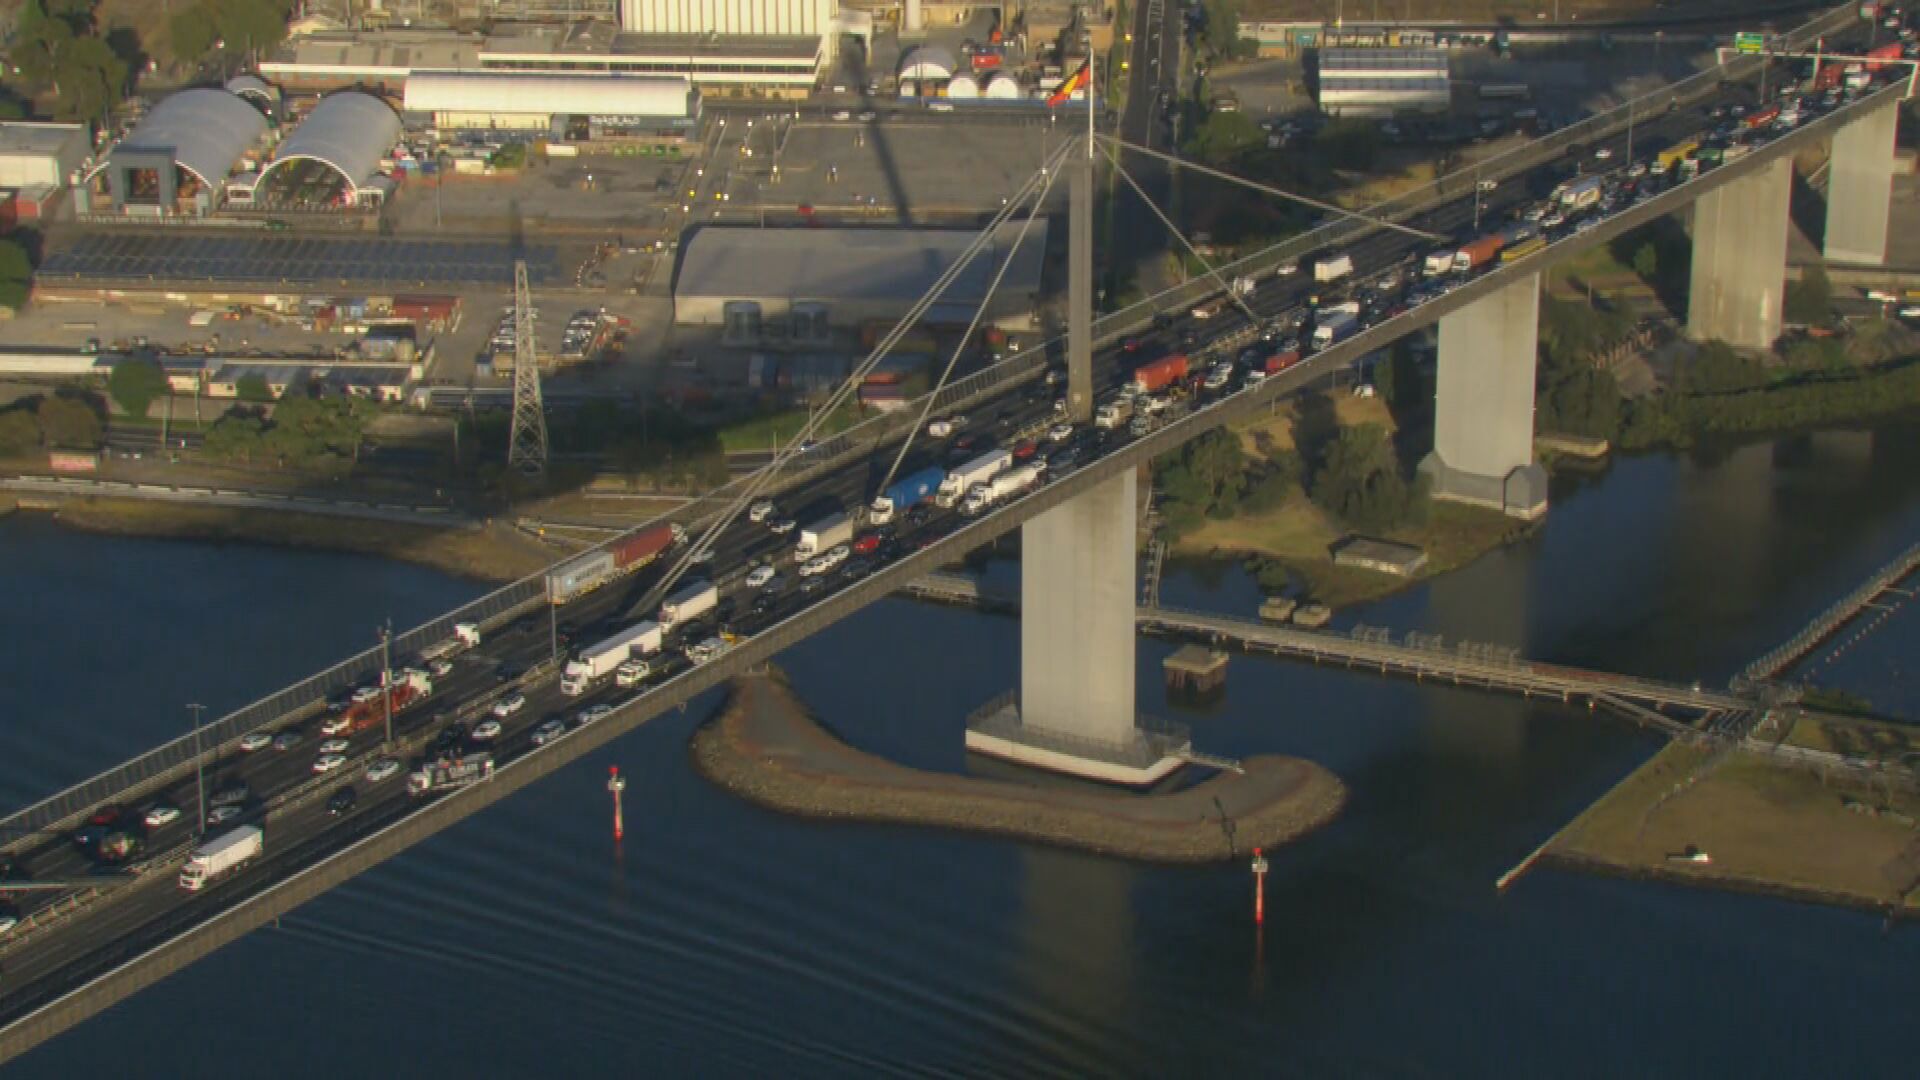 protesters 'removed' after blocking west gate bridge for hours